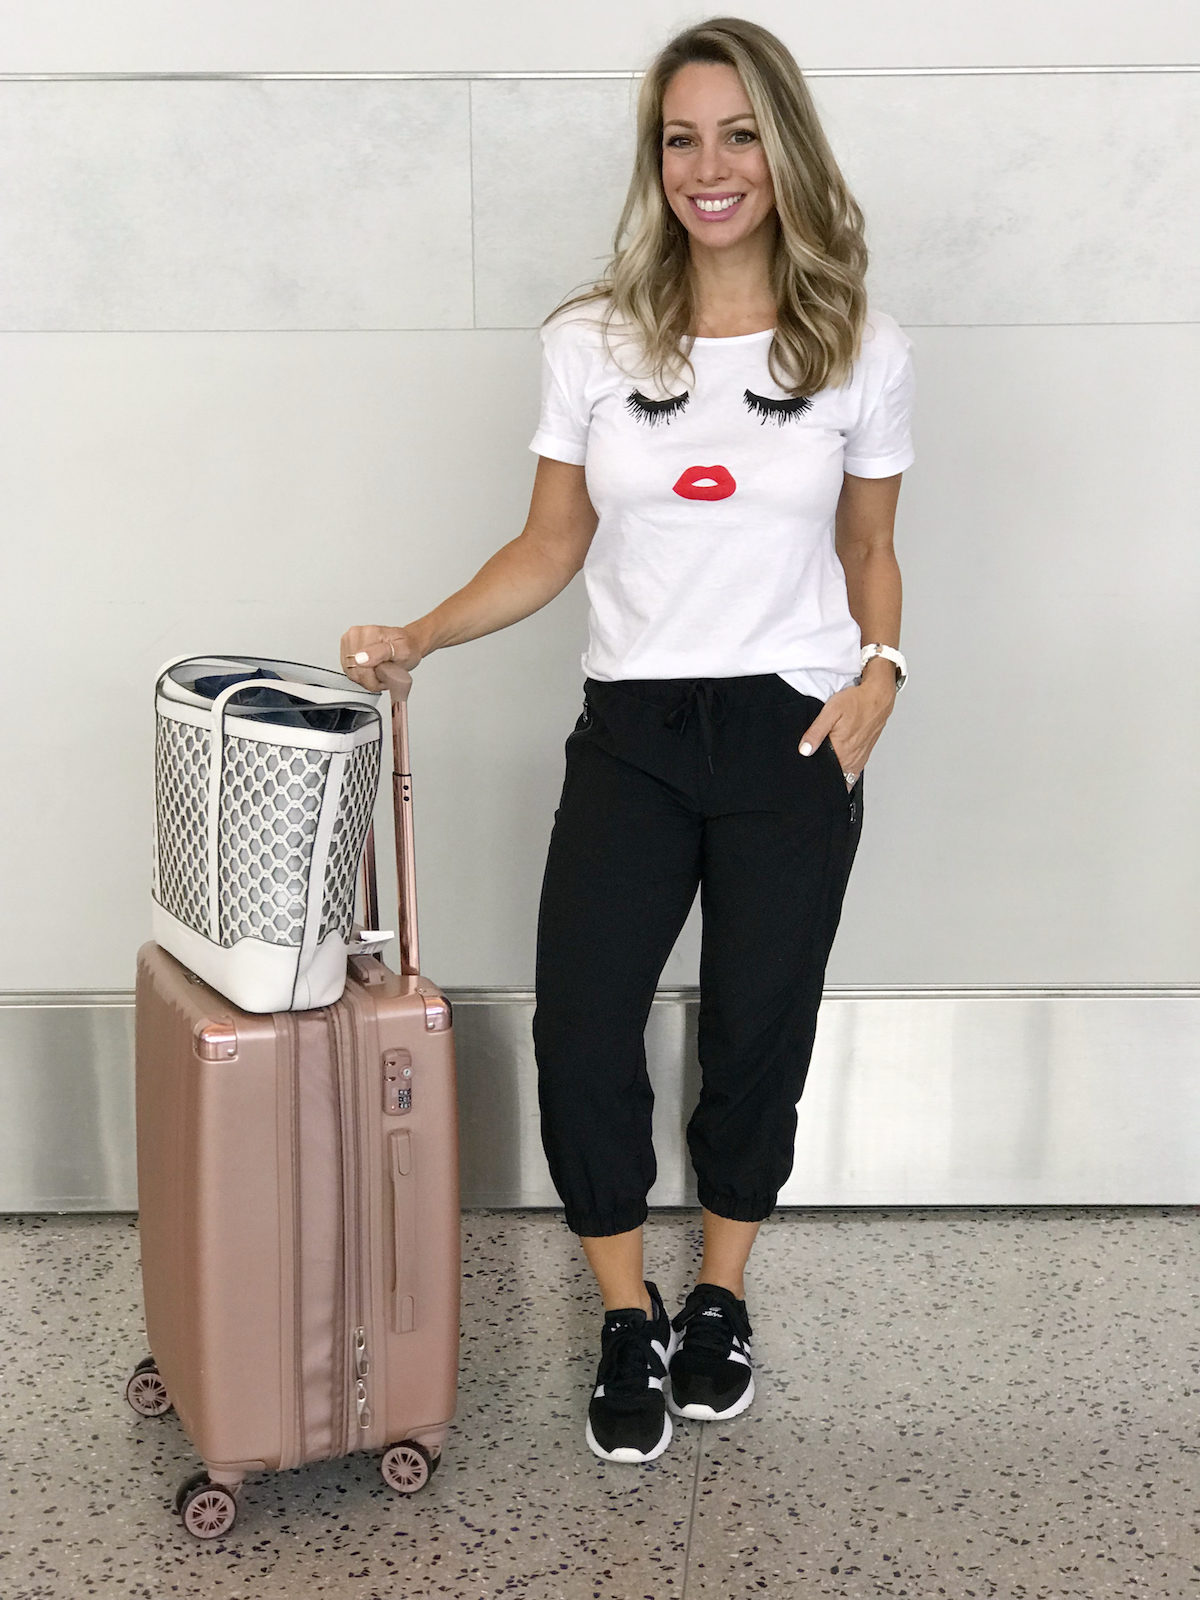 Comfy travel outfit